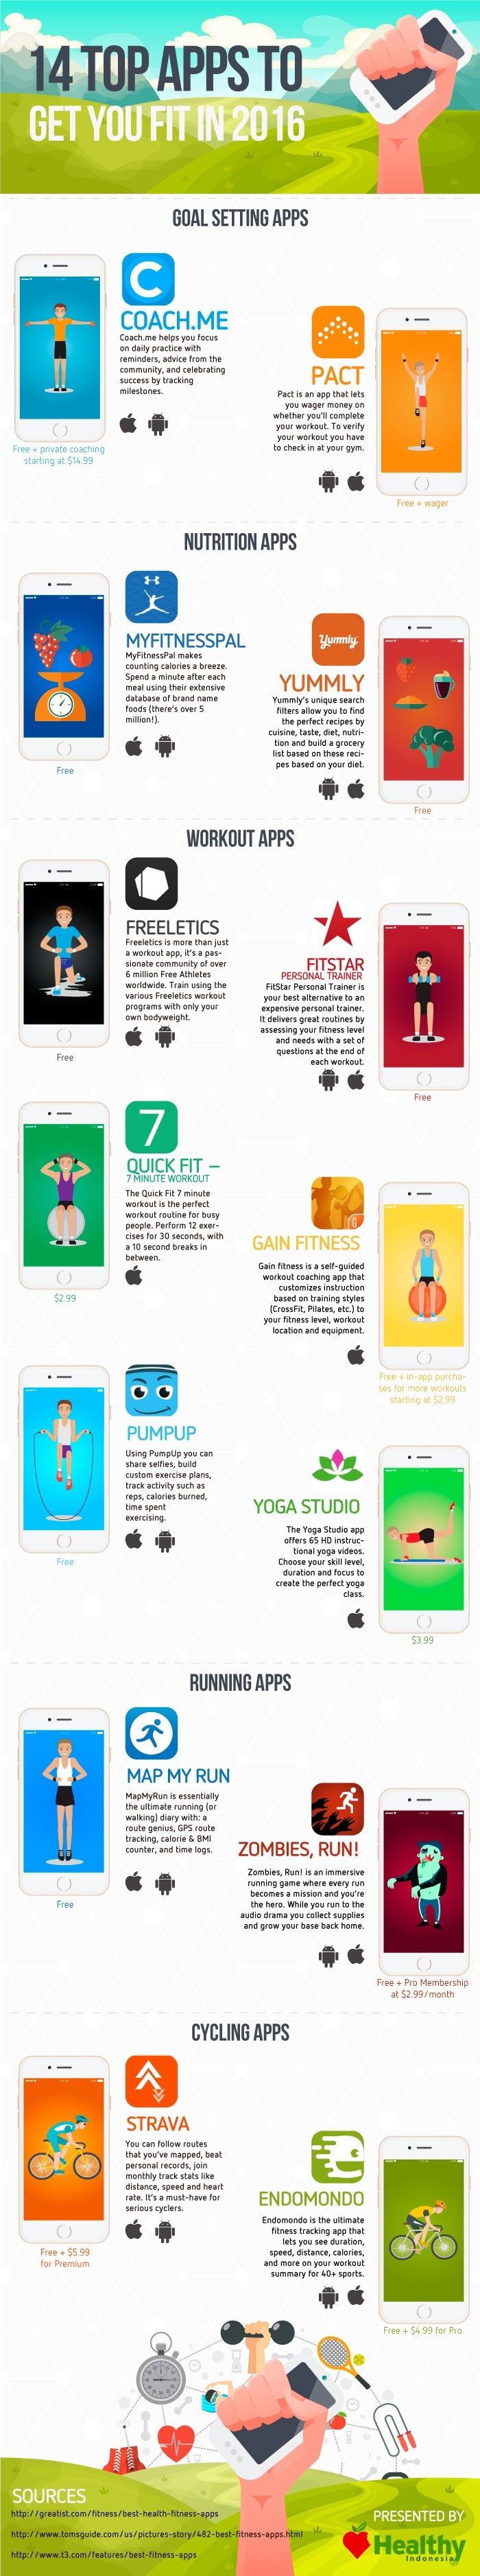 14 Top Apps To Get You Fit in 2016 #infographic